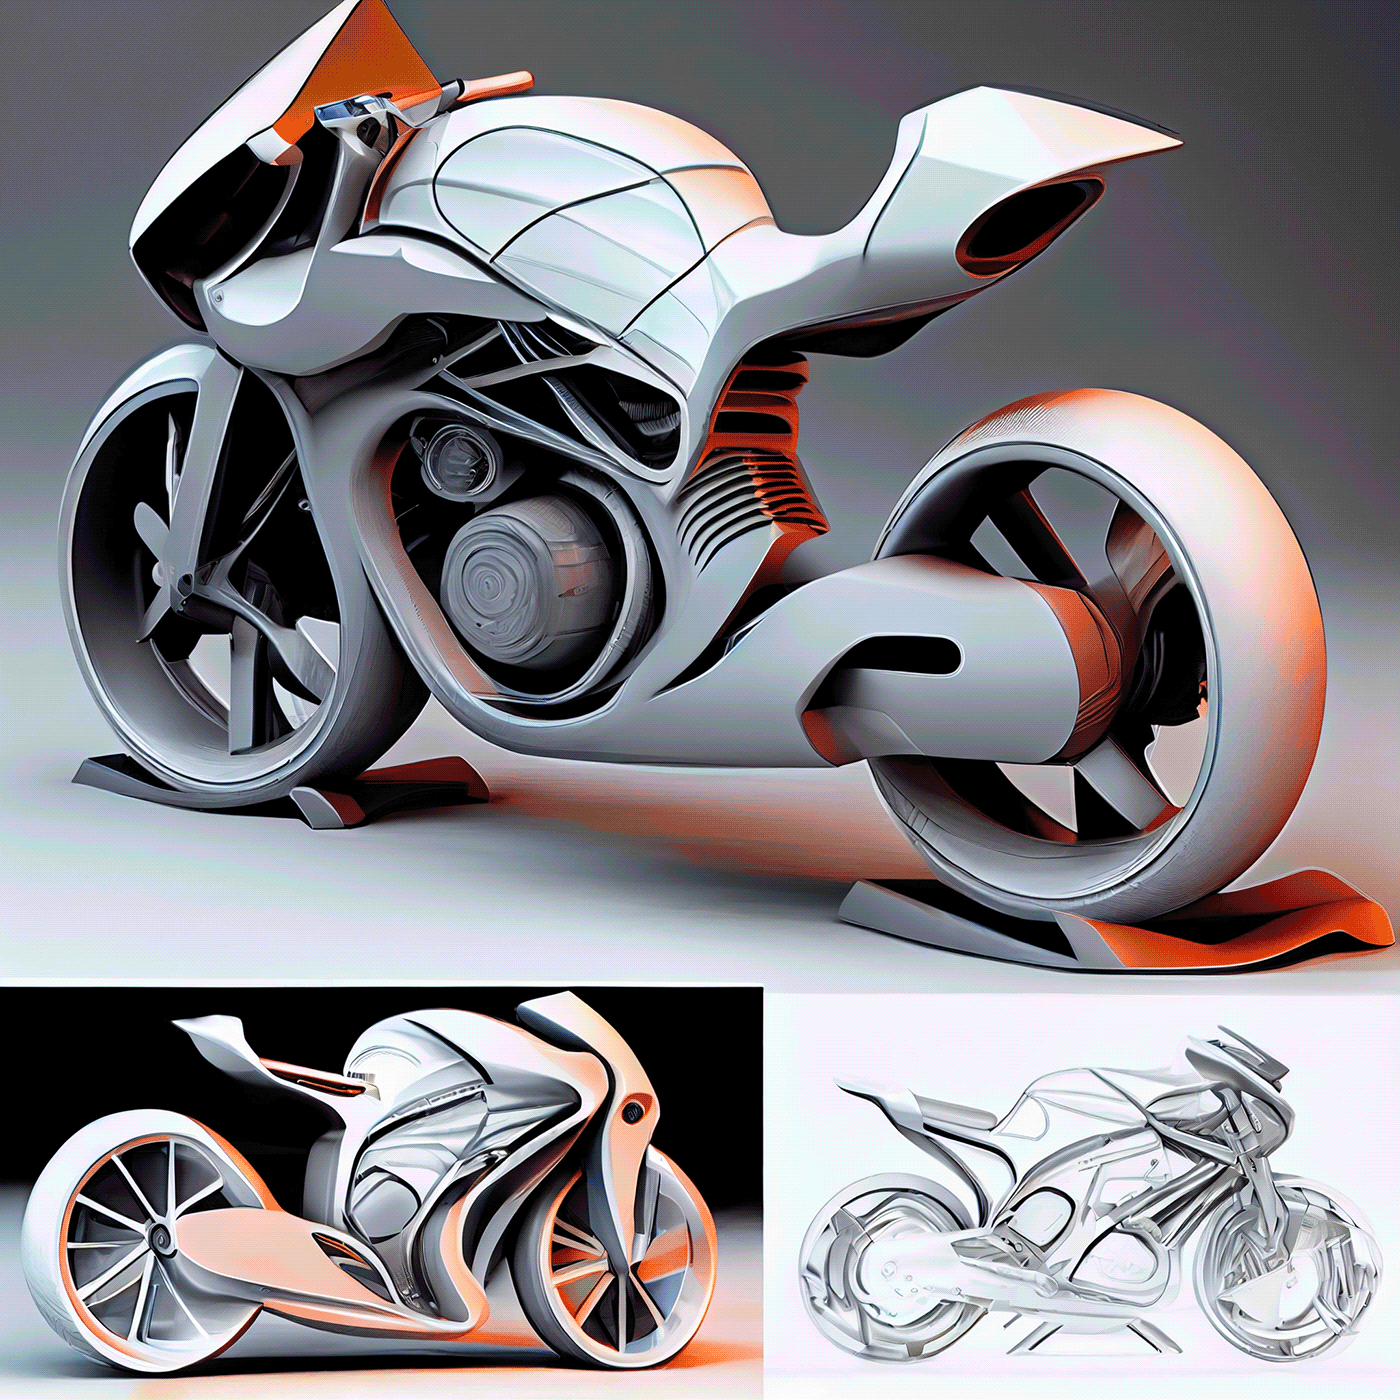 automotive   Bicycle Bike car car design concept Cycling motorcycle sport Vehicle